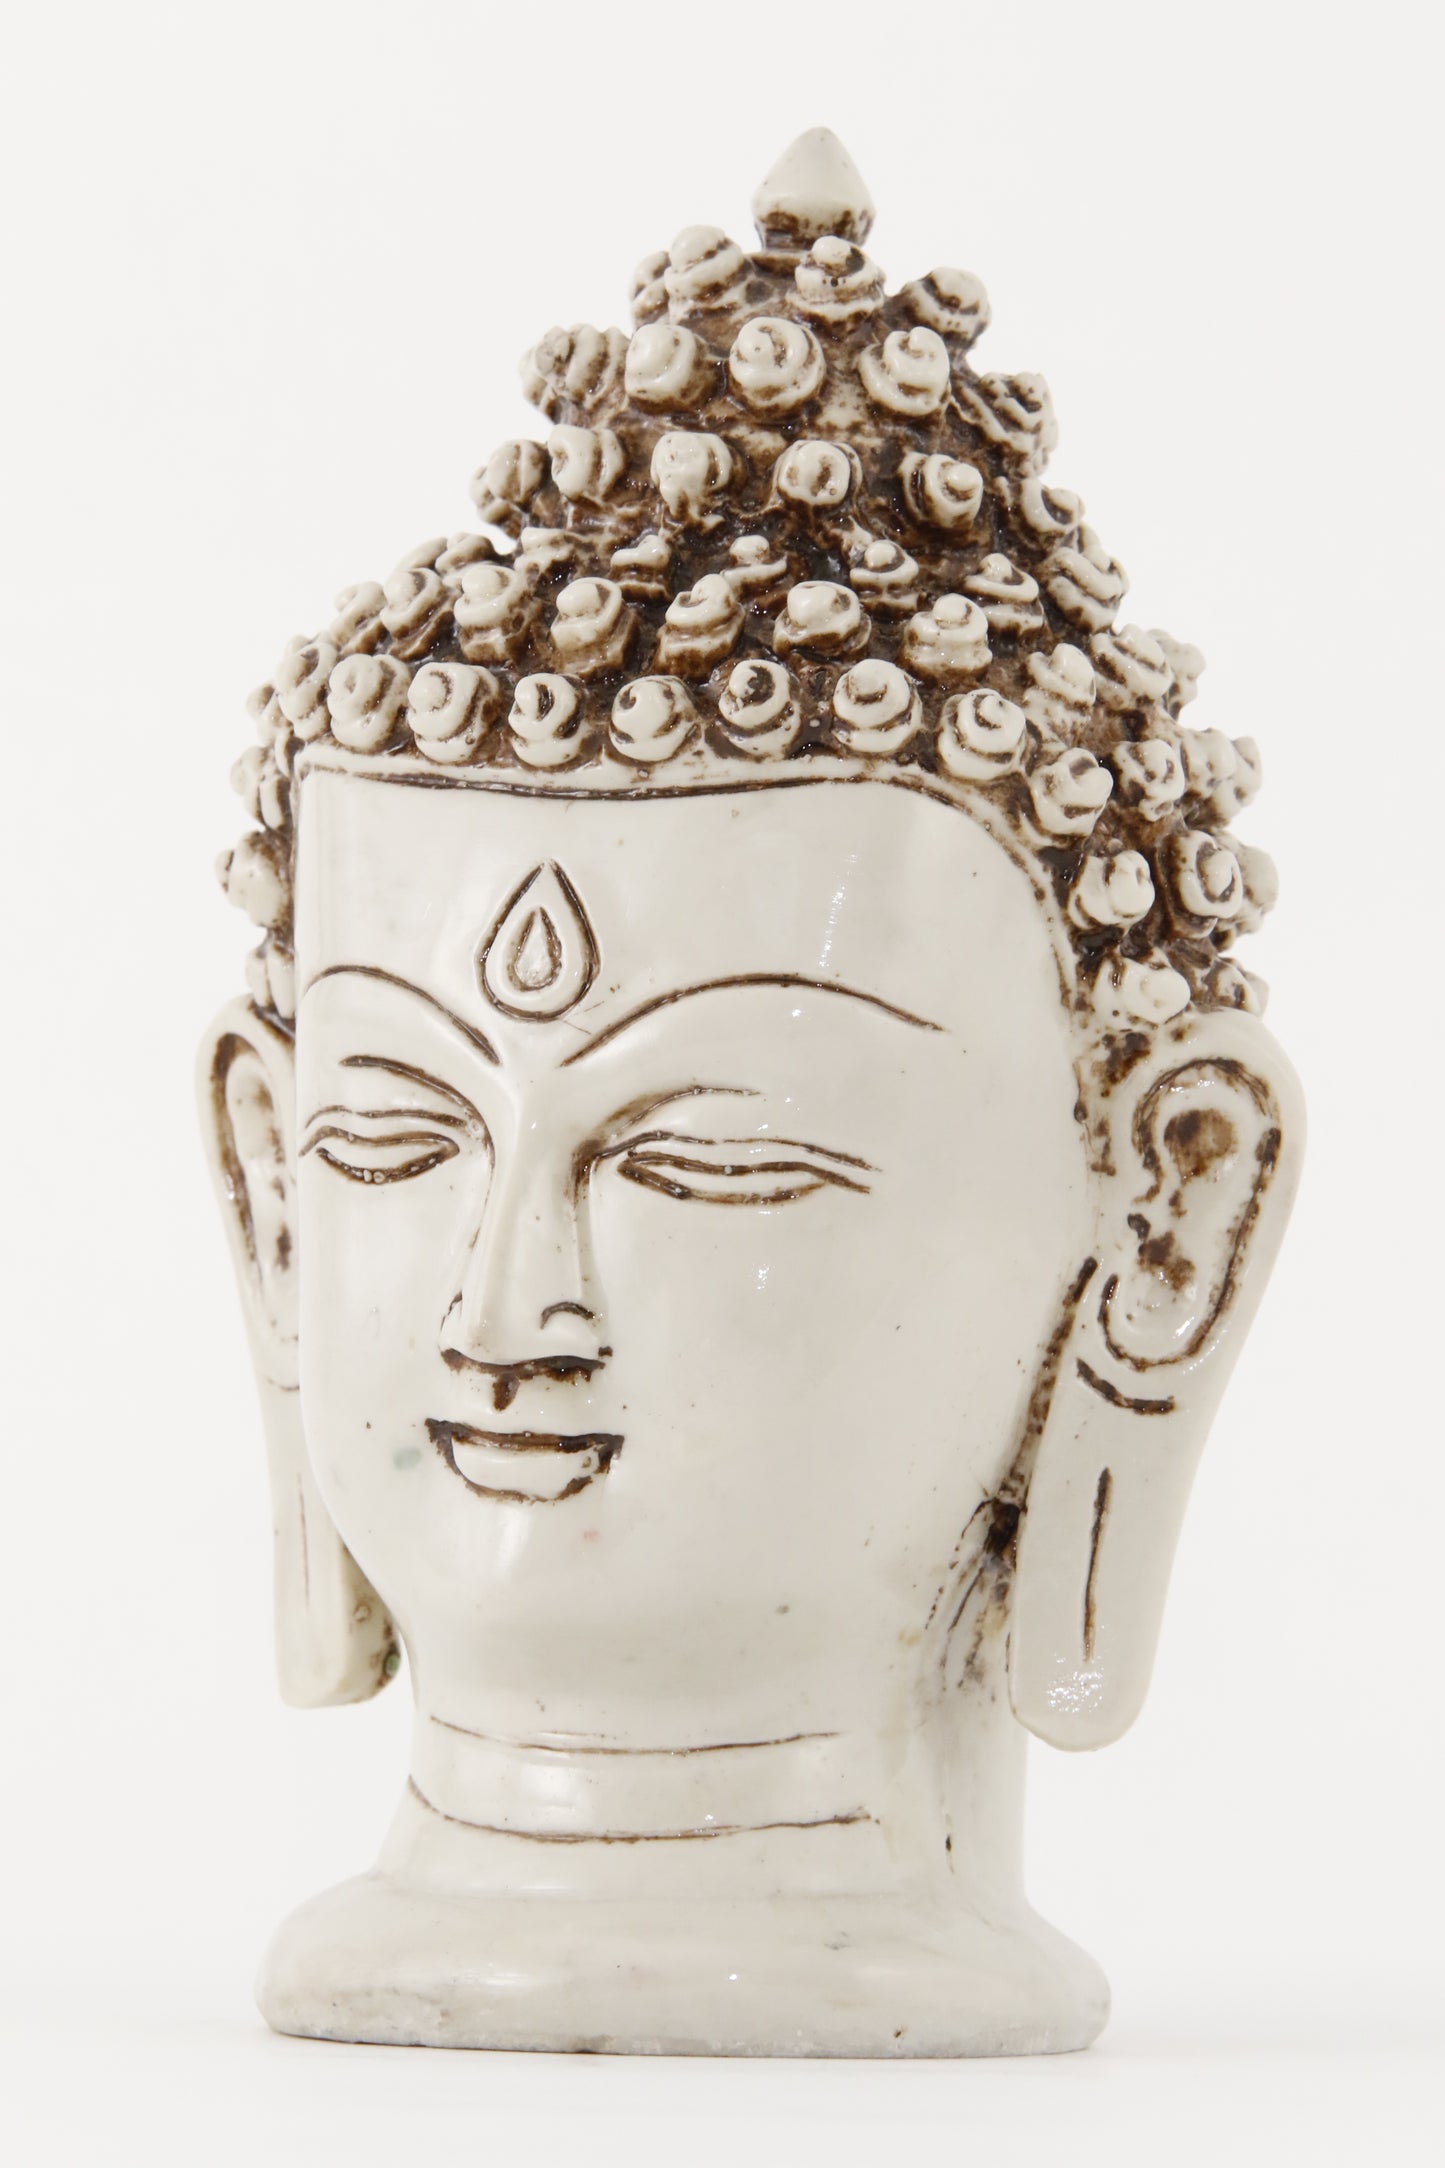 BUDDHA HEAD STATUE OFF-WHITE LARGE SIDE VIEW